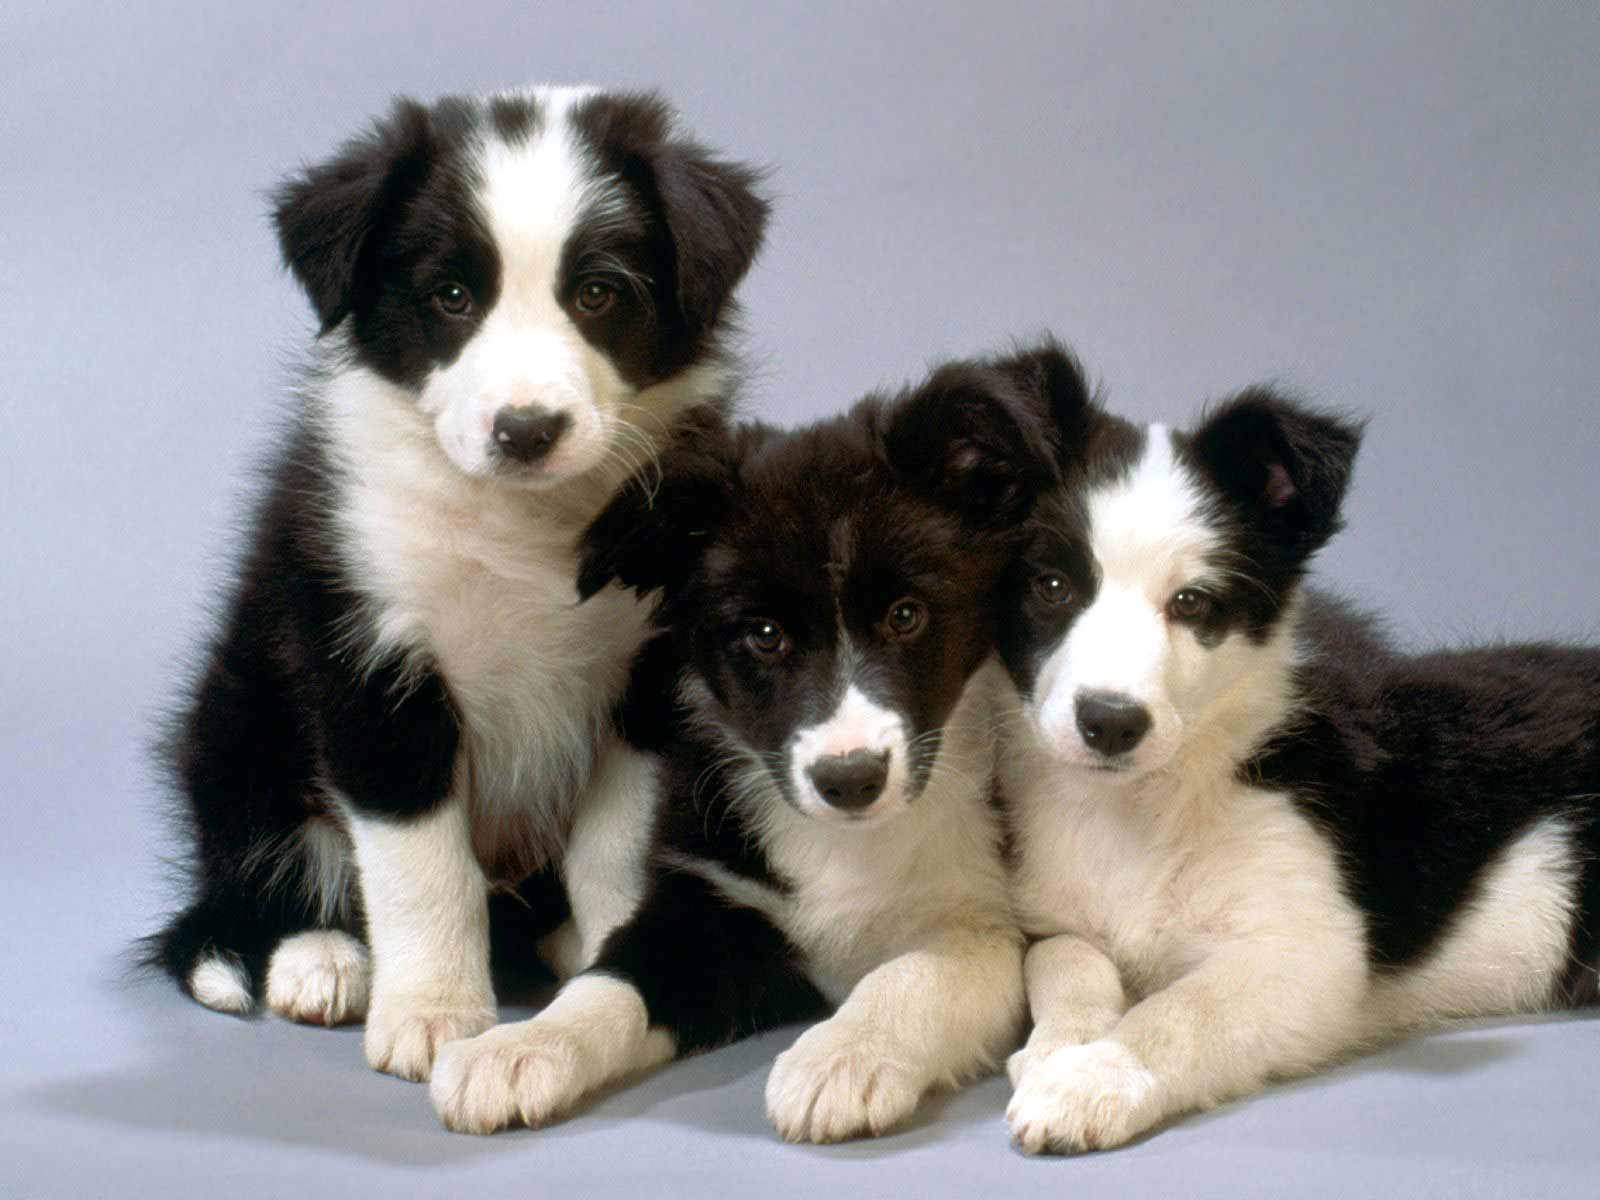 Border Collie Dog Breed » Information, Pictures, & More